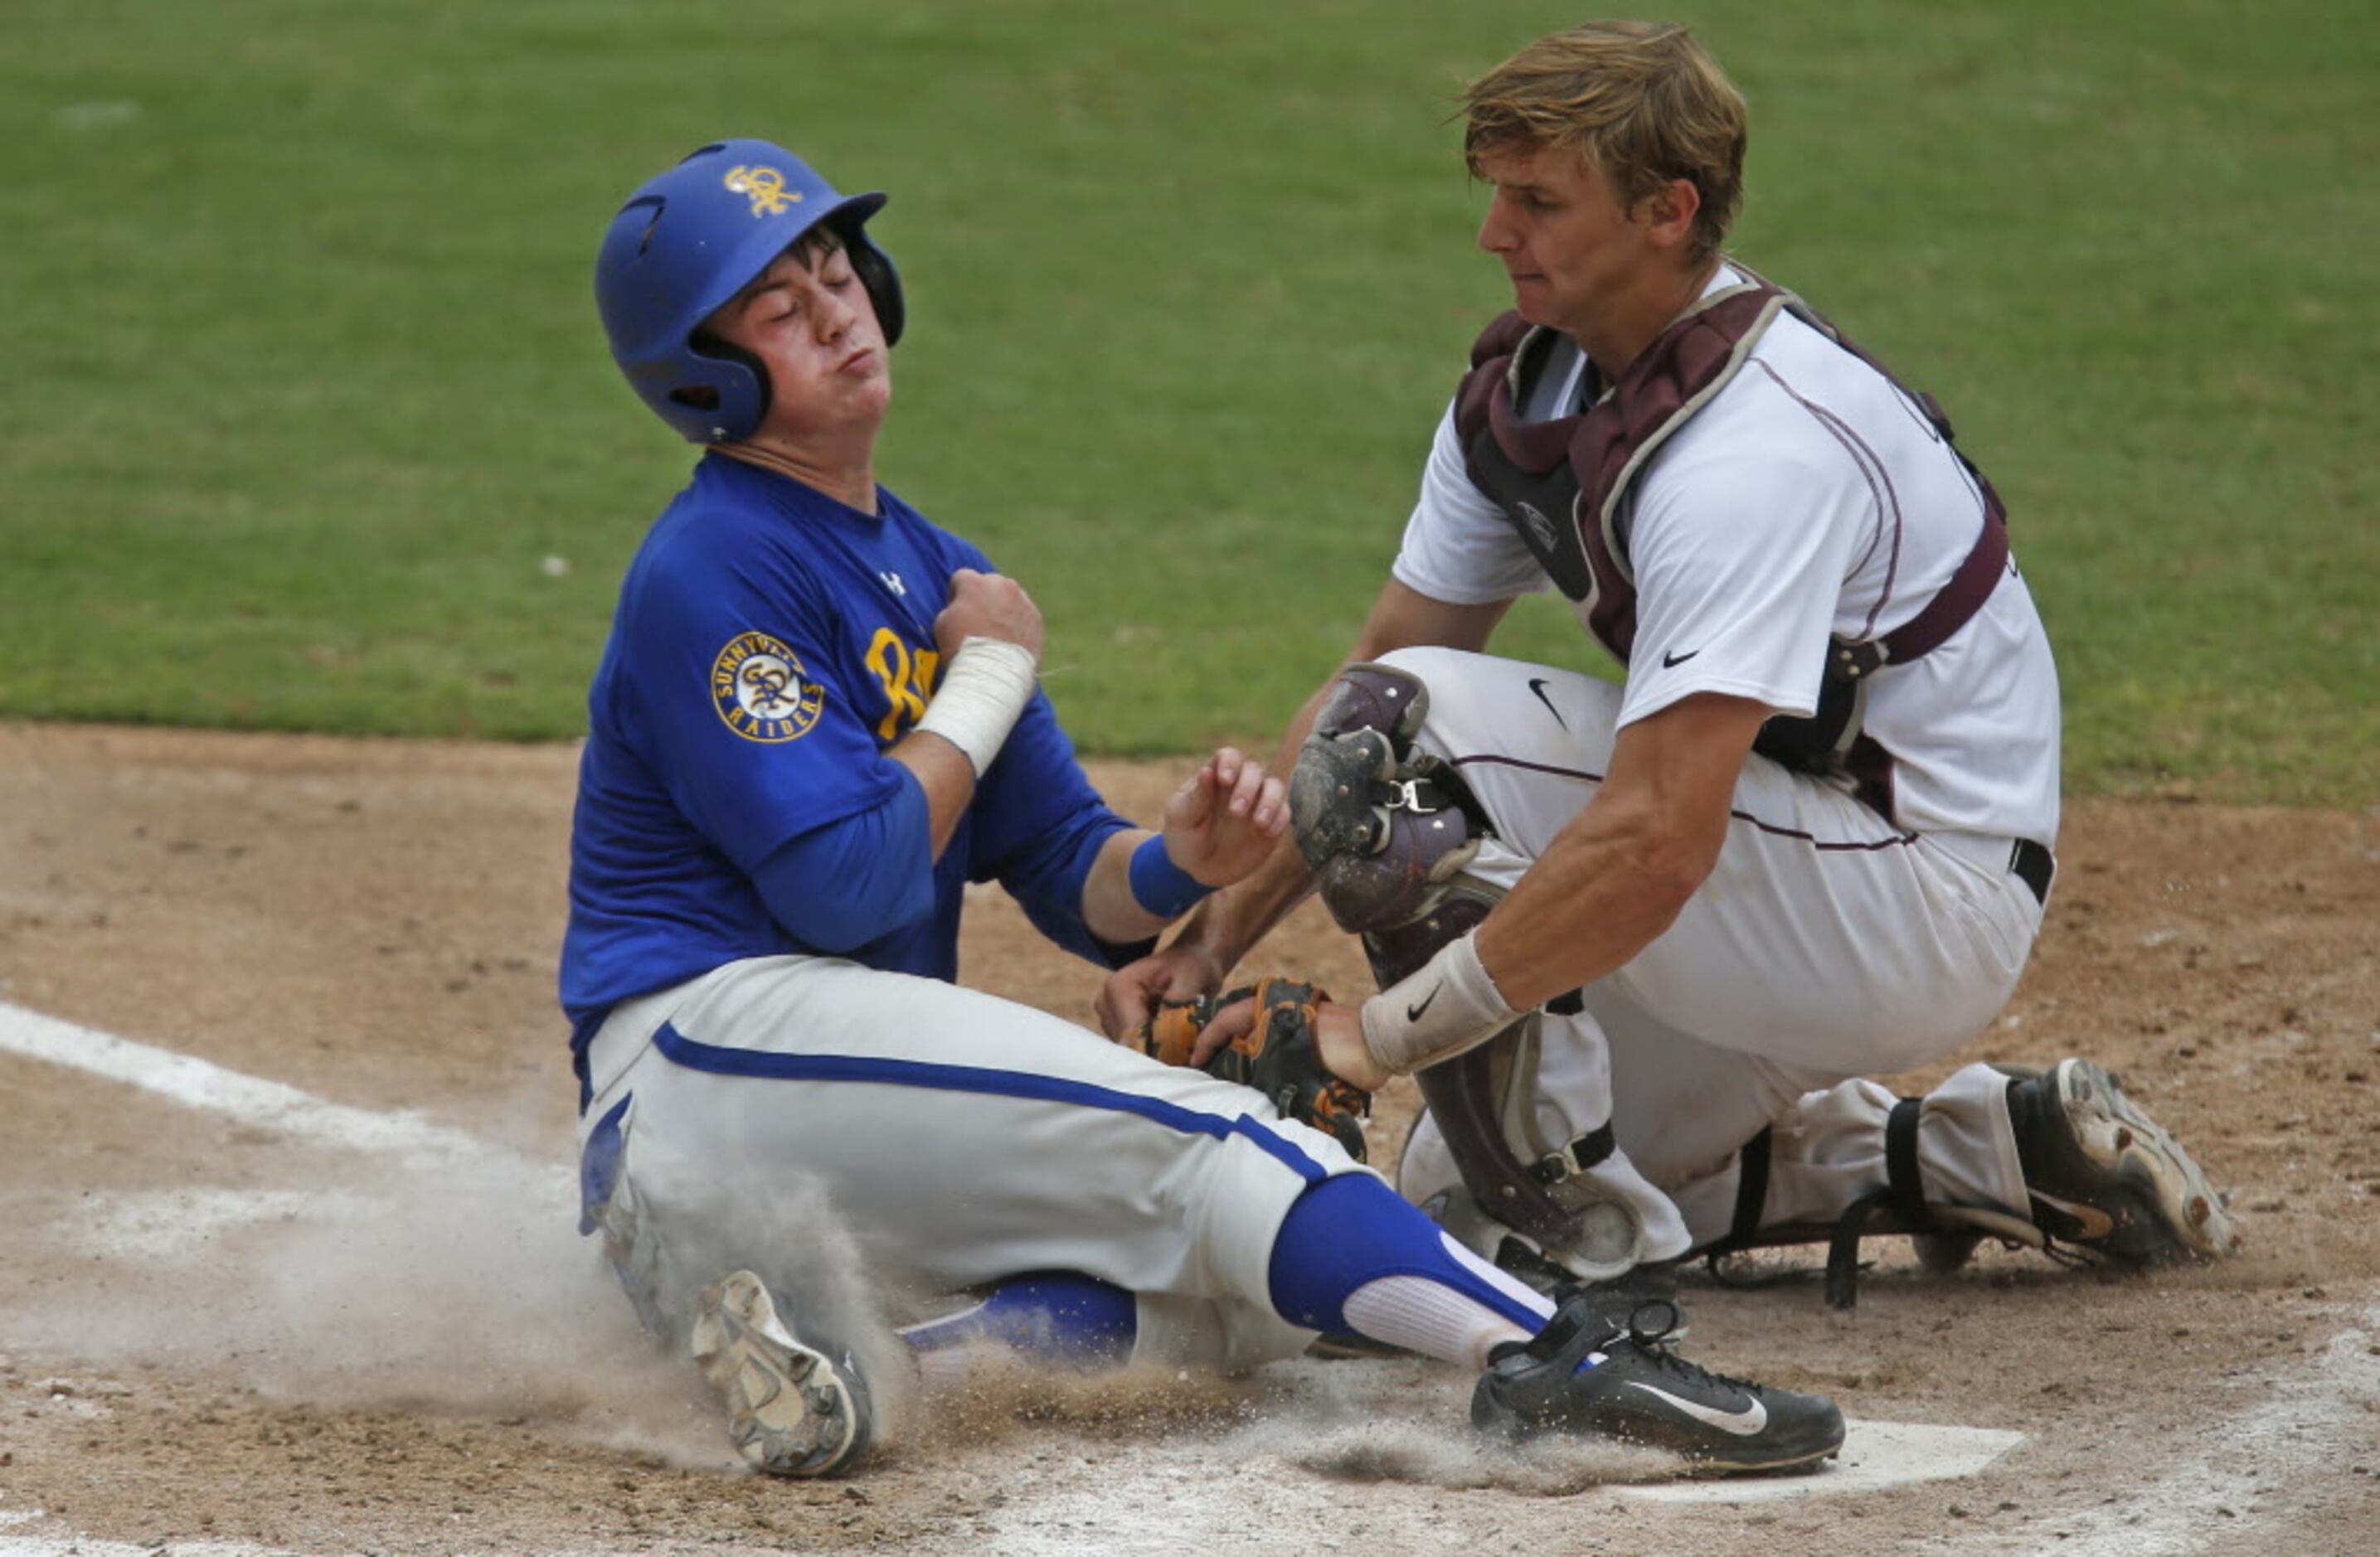 Sunnyvale's Wesley Phillips slides home safely with a run in the fourth inning as Troy...